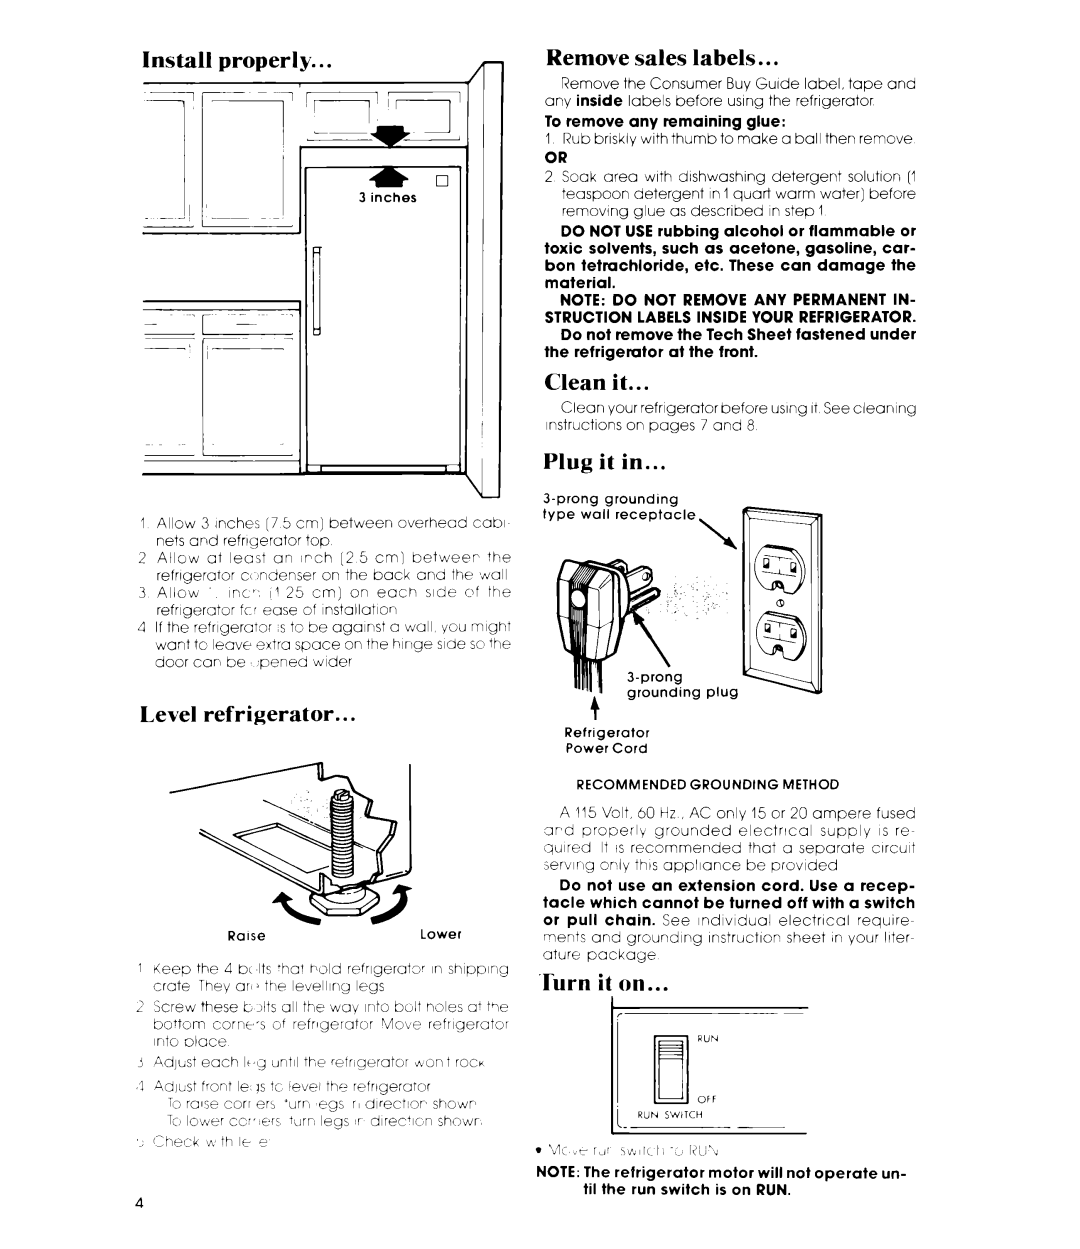 Whirlpool EL15CC manual Install properly, Remove sales labels, Clean it, Plug it in, Level refrigerator, Turn it on 